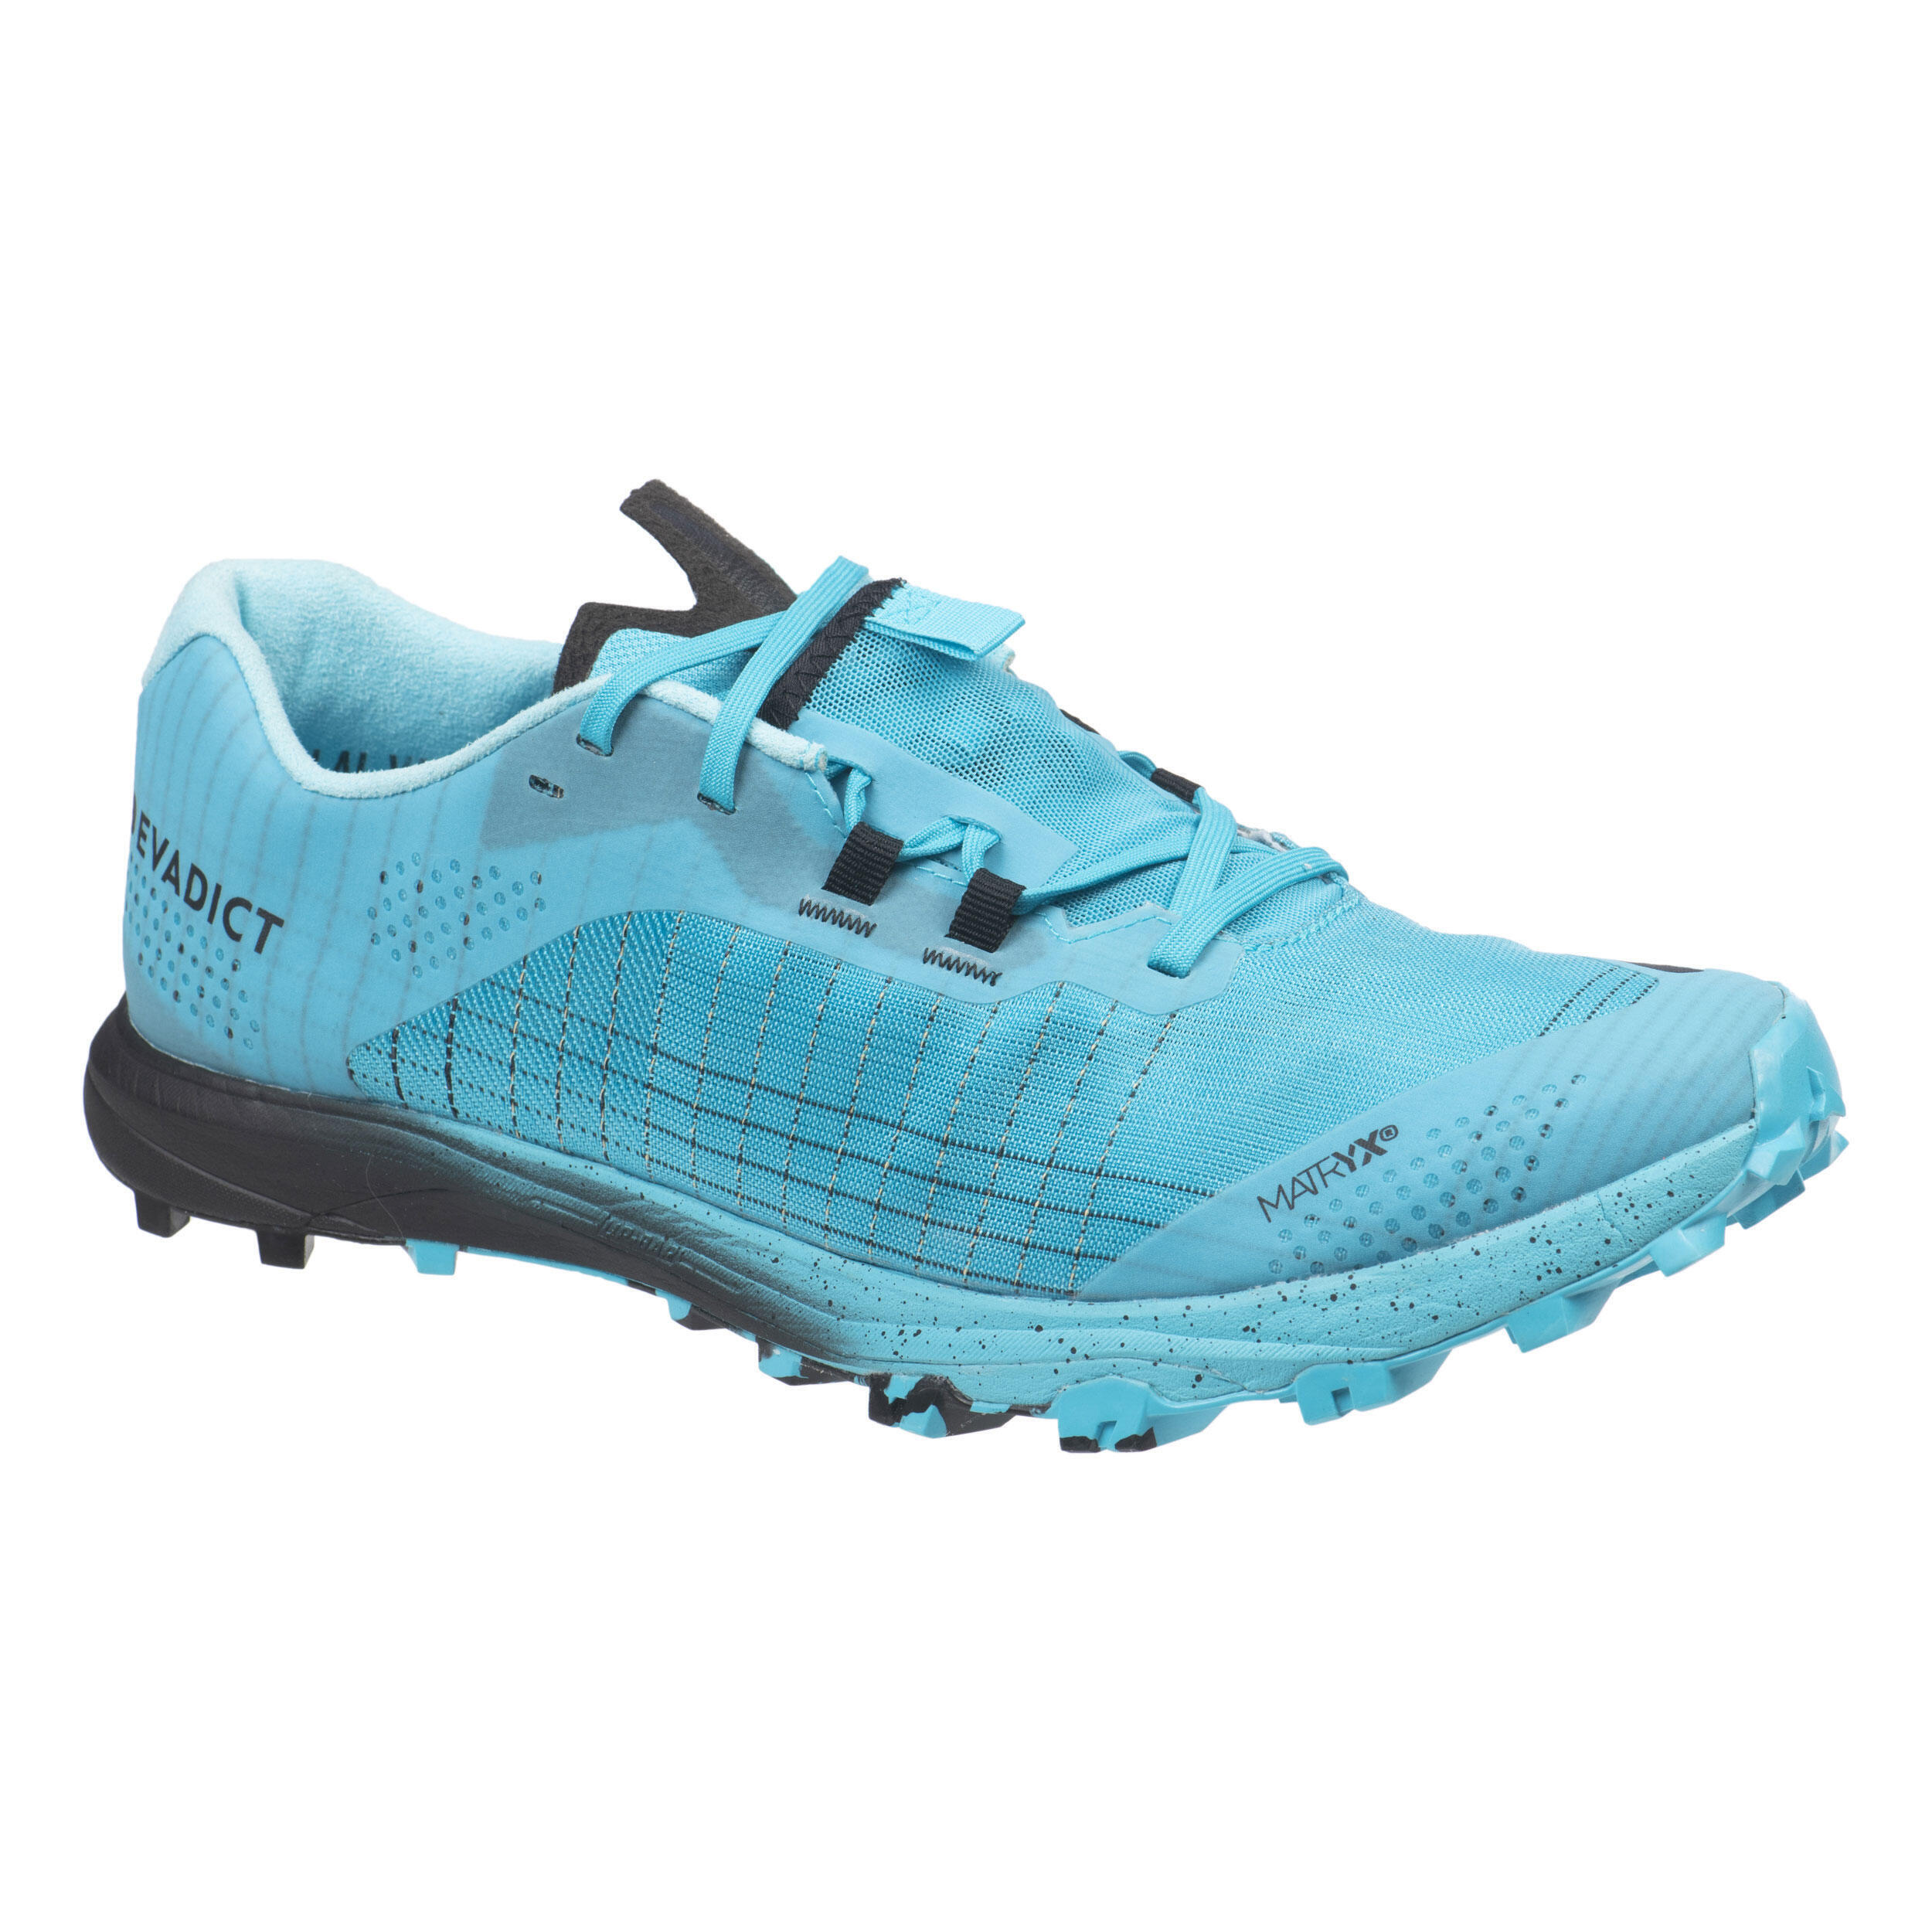 Race Light Men's Trail Running Shoes - sky blue and black 1/14